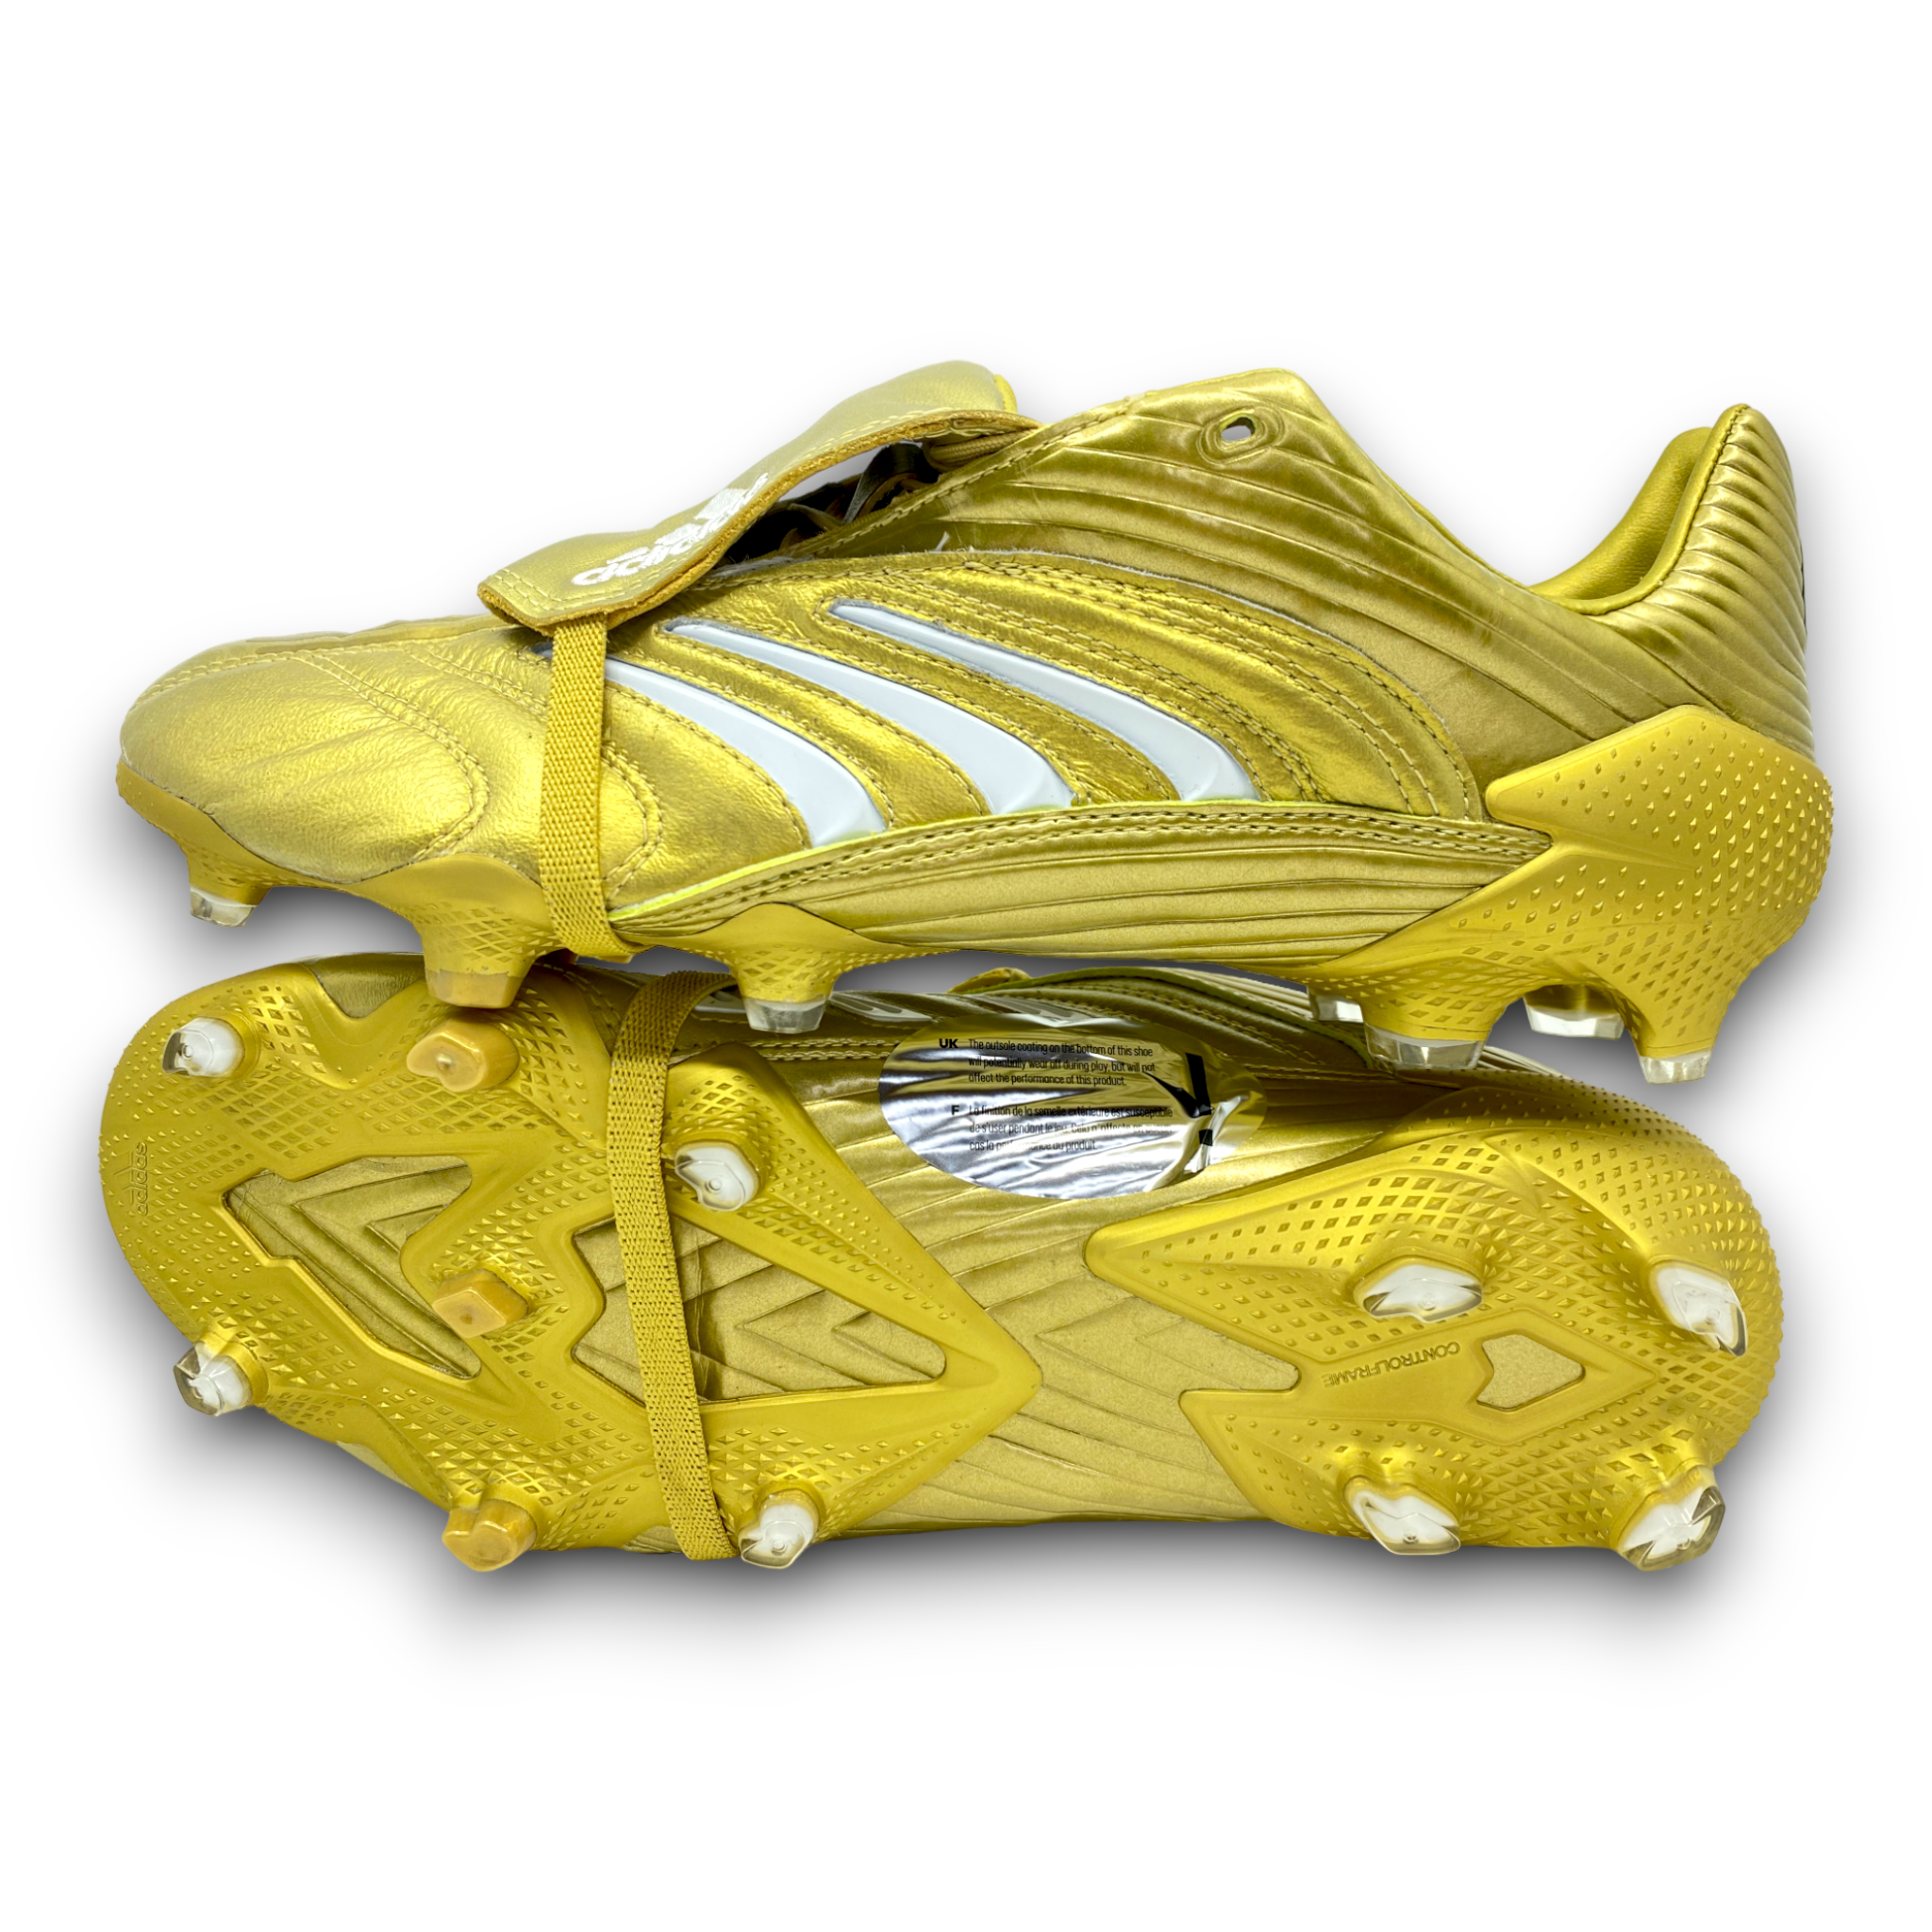 Adidas Absolute FG "Pack The Comeback" Edition shoptcrampons